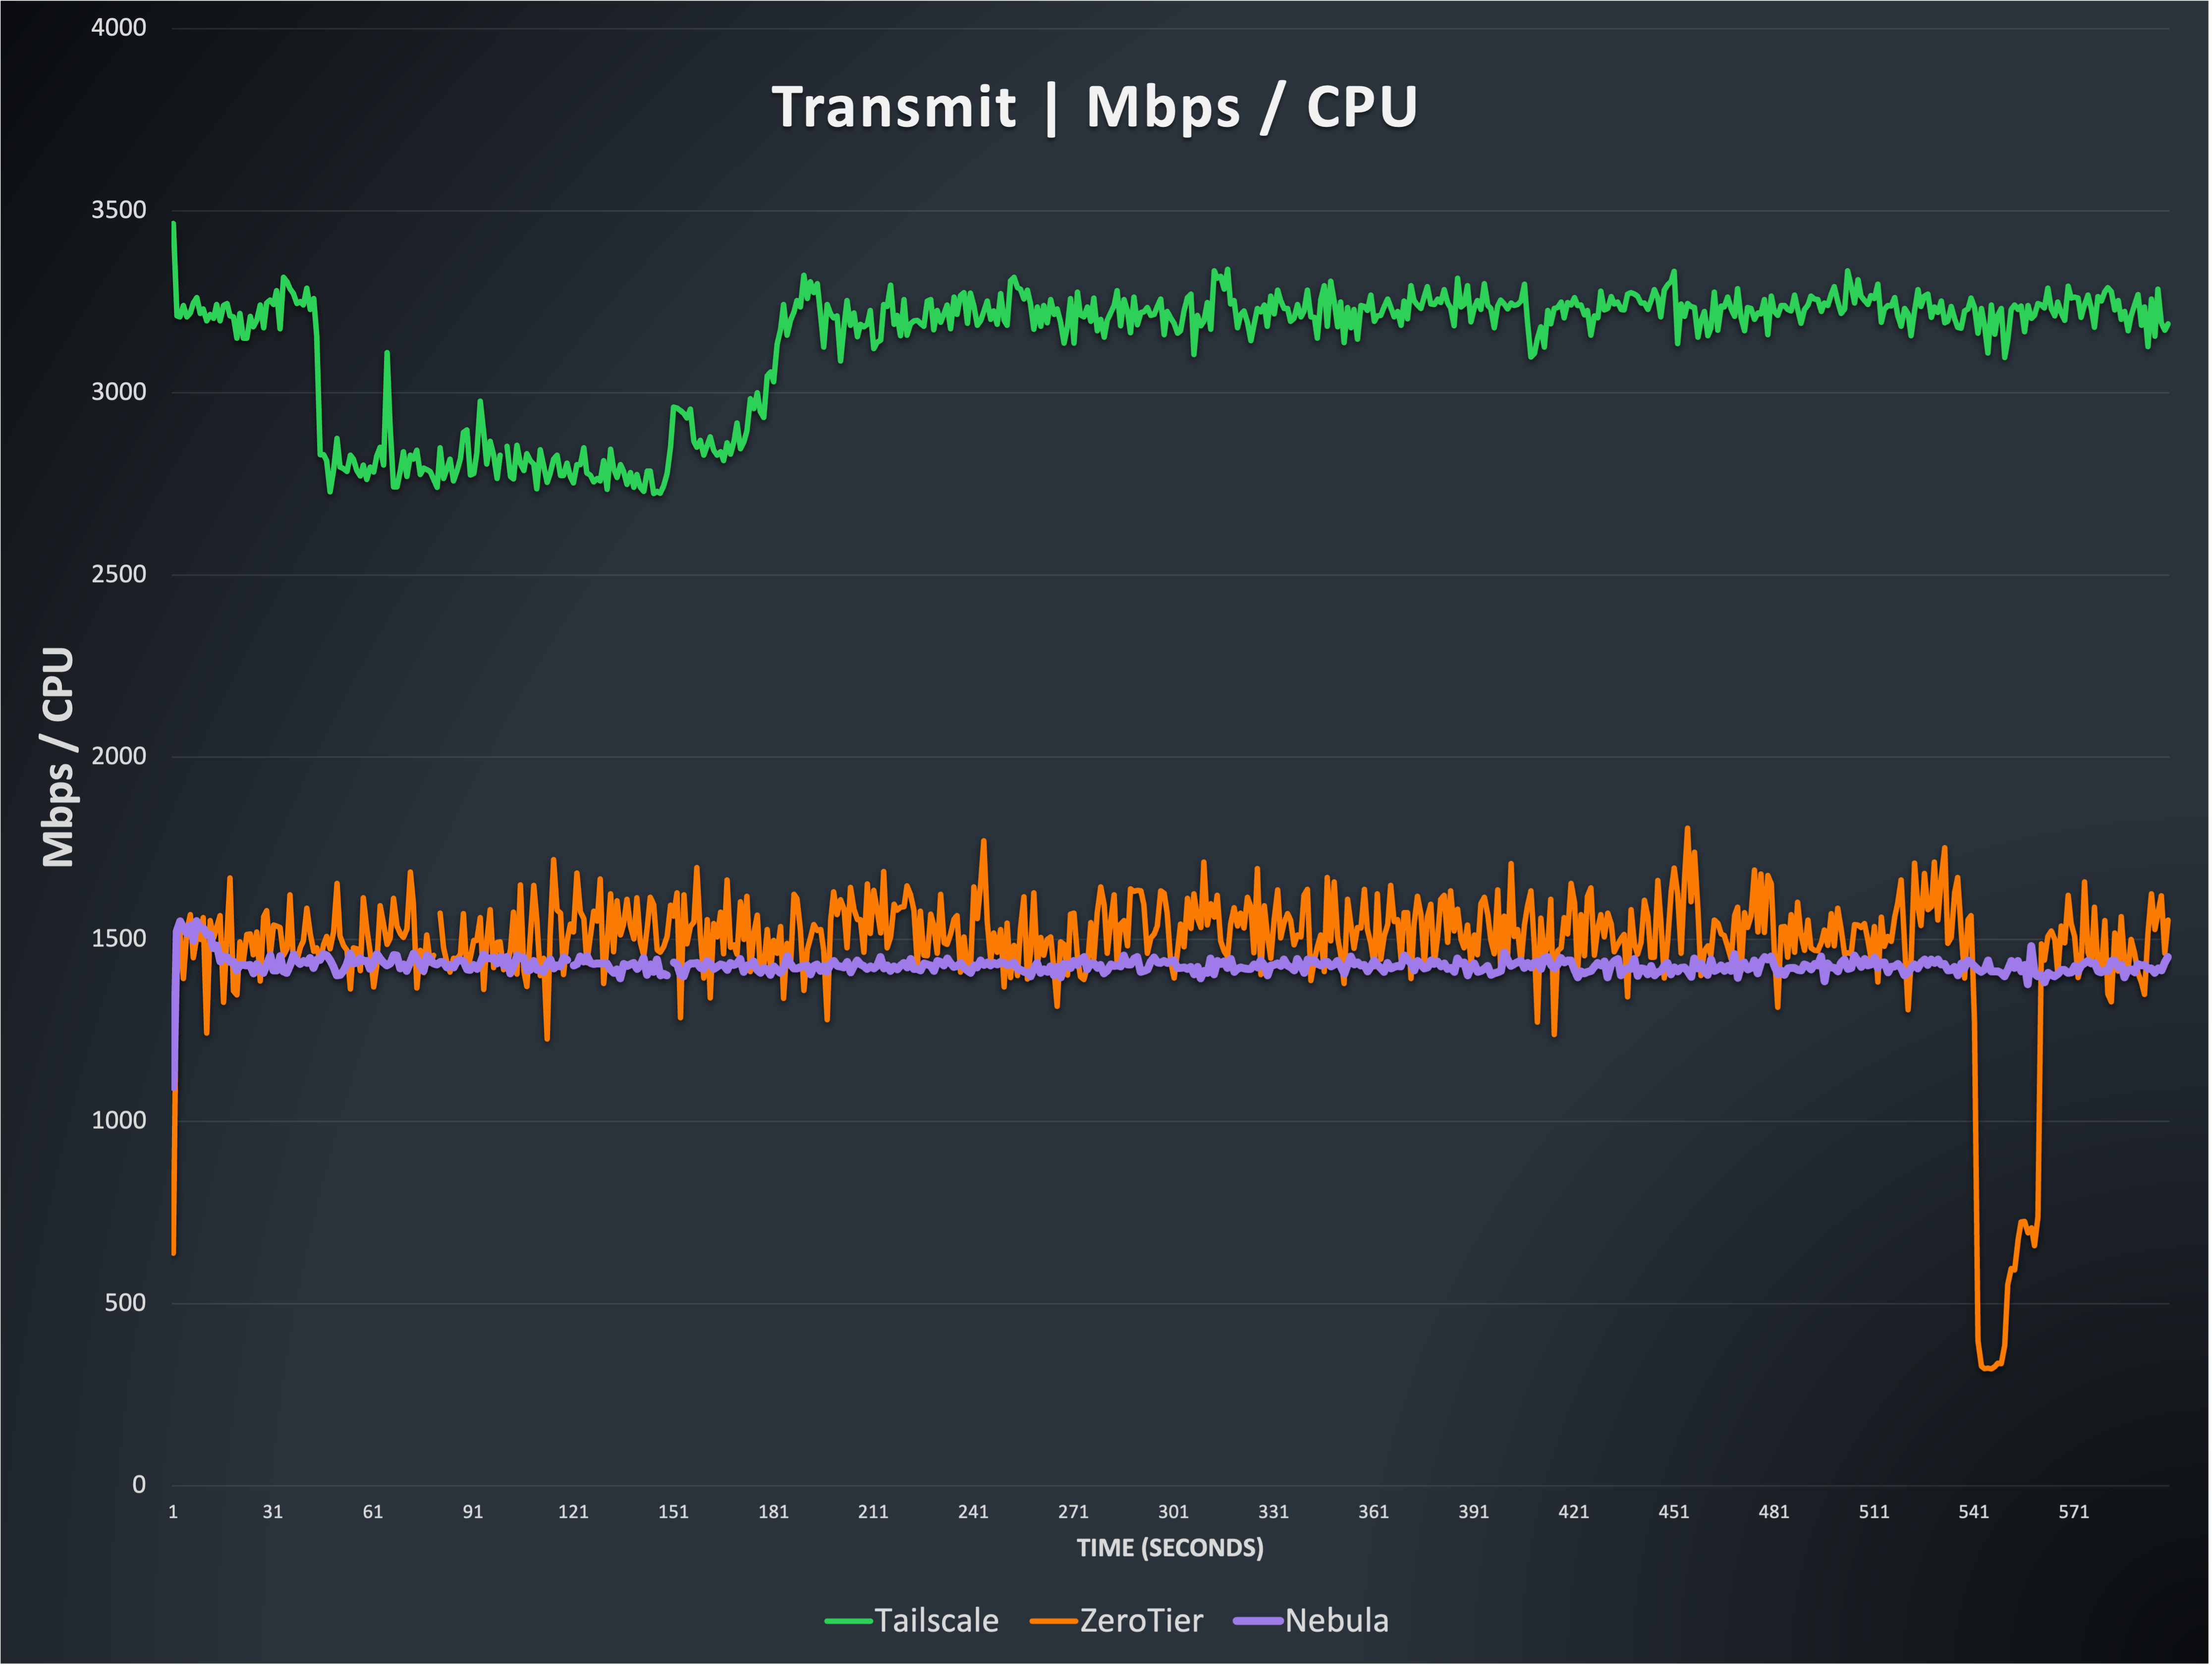 Line graph showing the transmit efficiency of Nebula, Tailscale, and ZeroTier, expressed as Mbps per CPU core. ZeroTier and Nebula hover around 1500, with ZeroTier having greater variability between 1400 and 1600 (at one point dropping to about 400 for approximately 30 seconds). Tailscale is approximately double these, at about 3200 for most of the test.